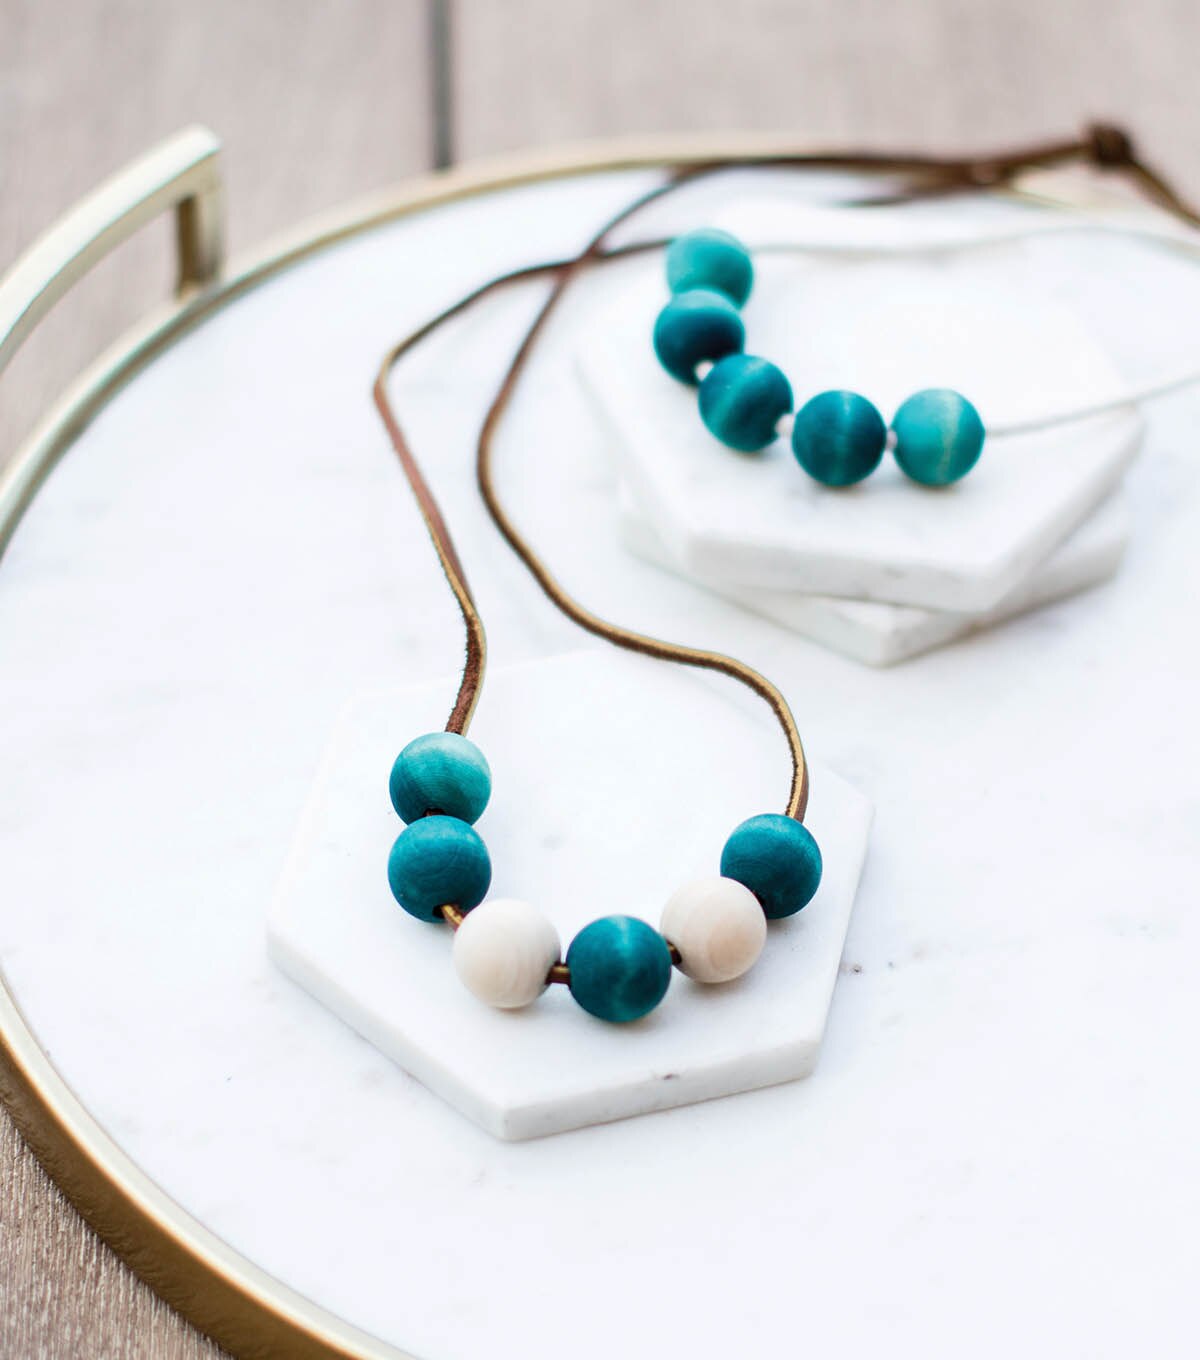 How To Make A Dyed Wood Bead Necklace | JOANN